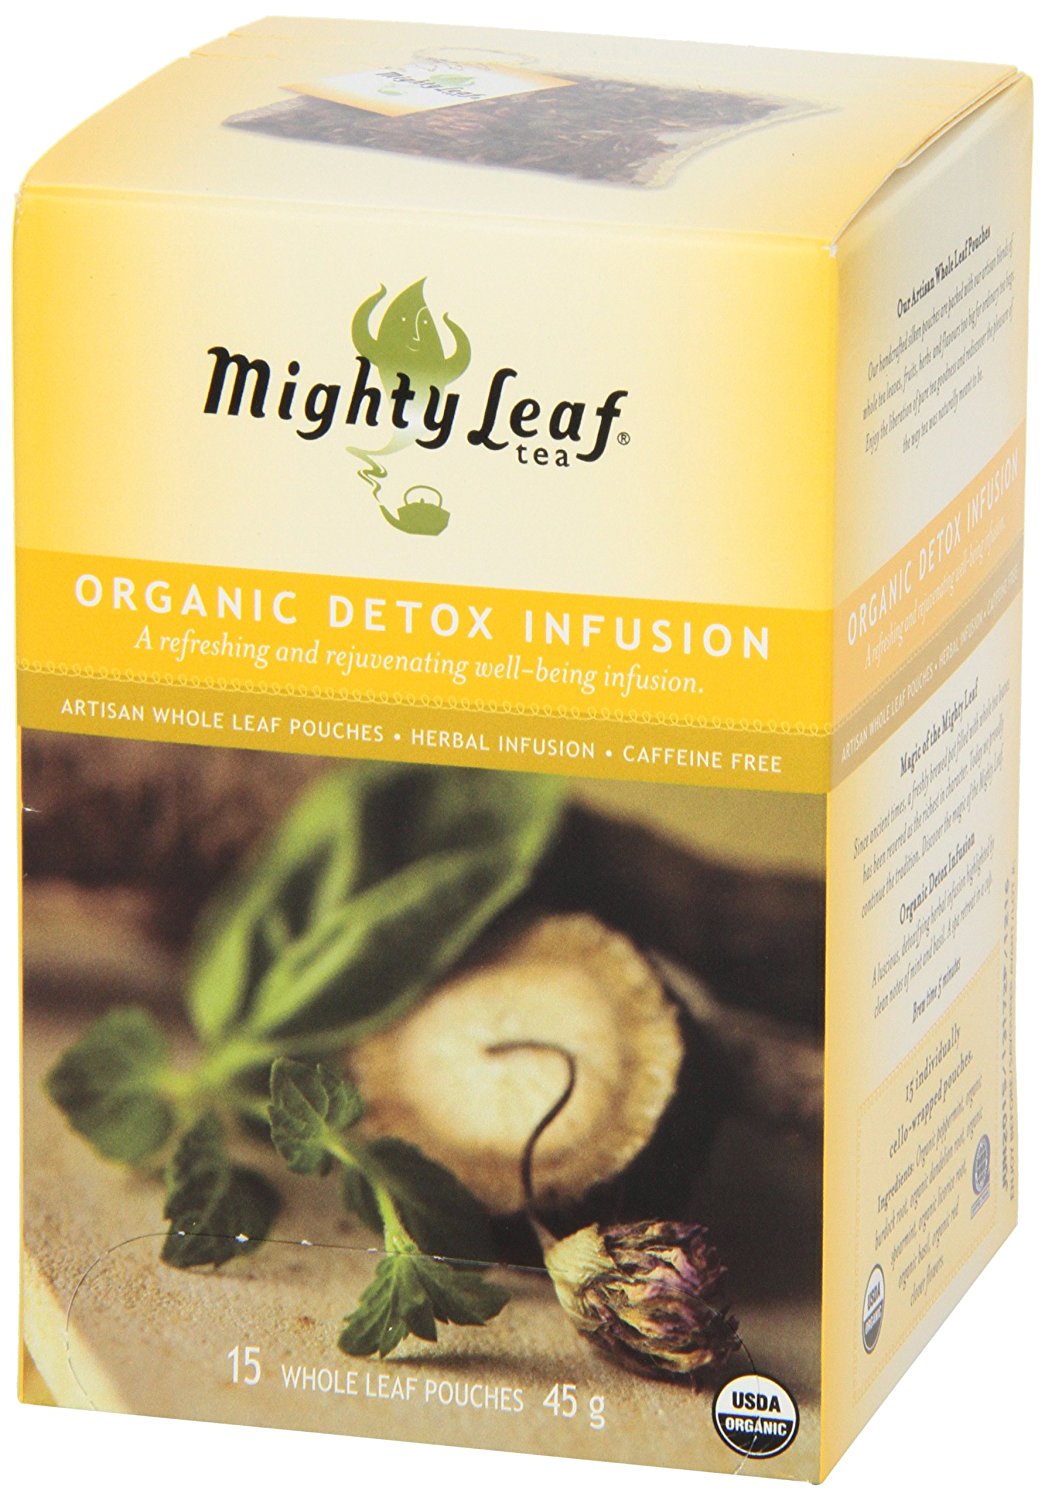 Mighty Leaf Herbal Tea Organic Detox Infusion 15 Pouches Free Image Download